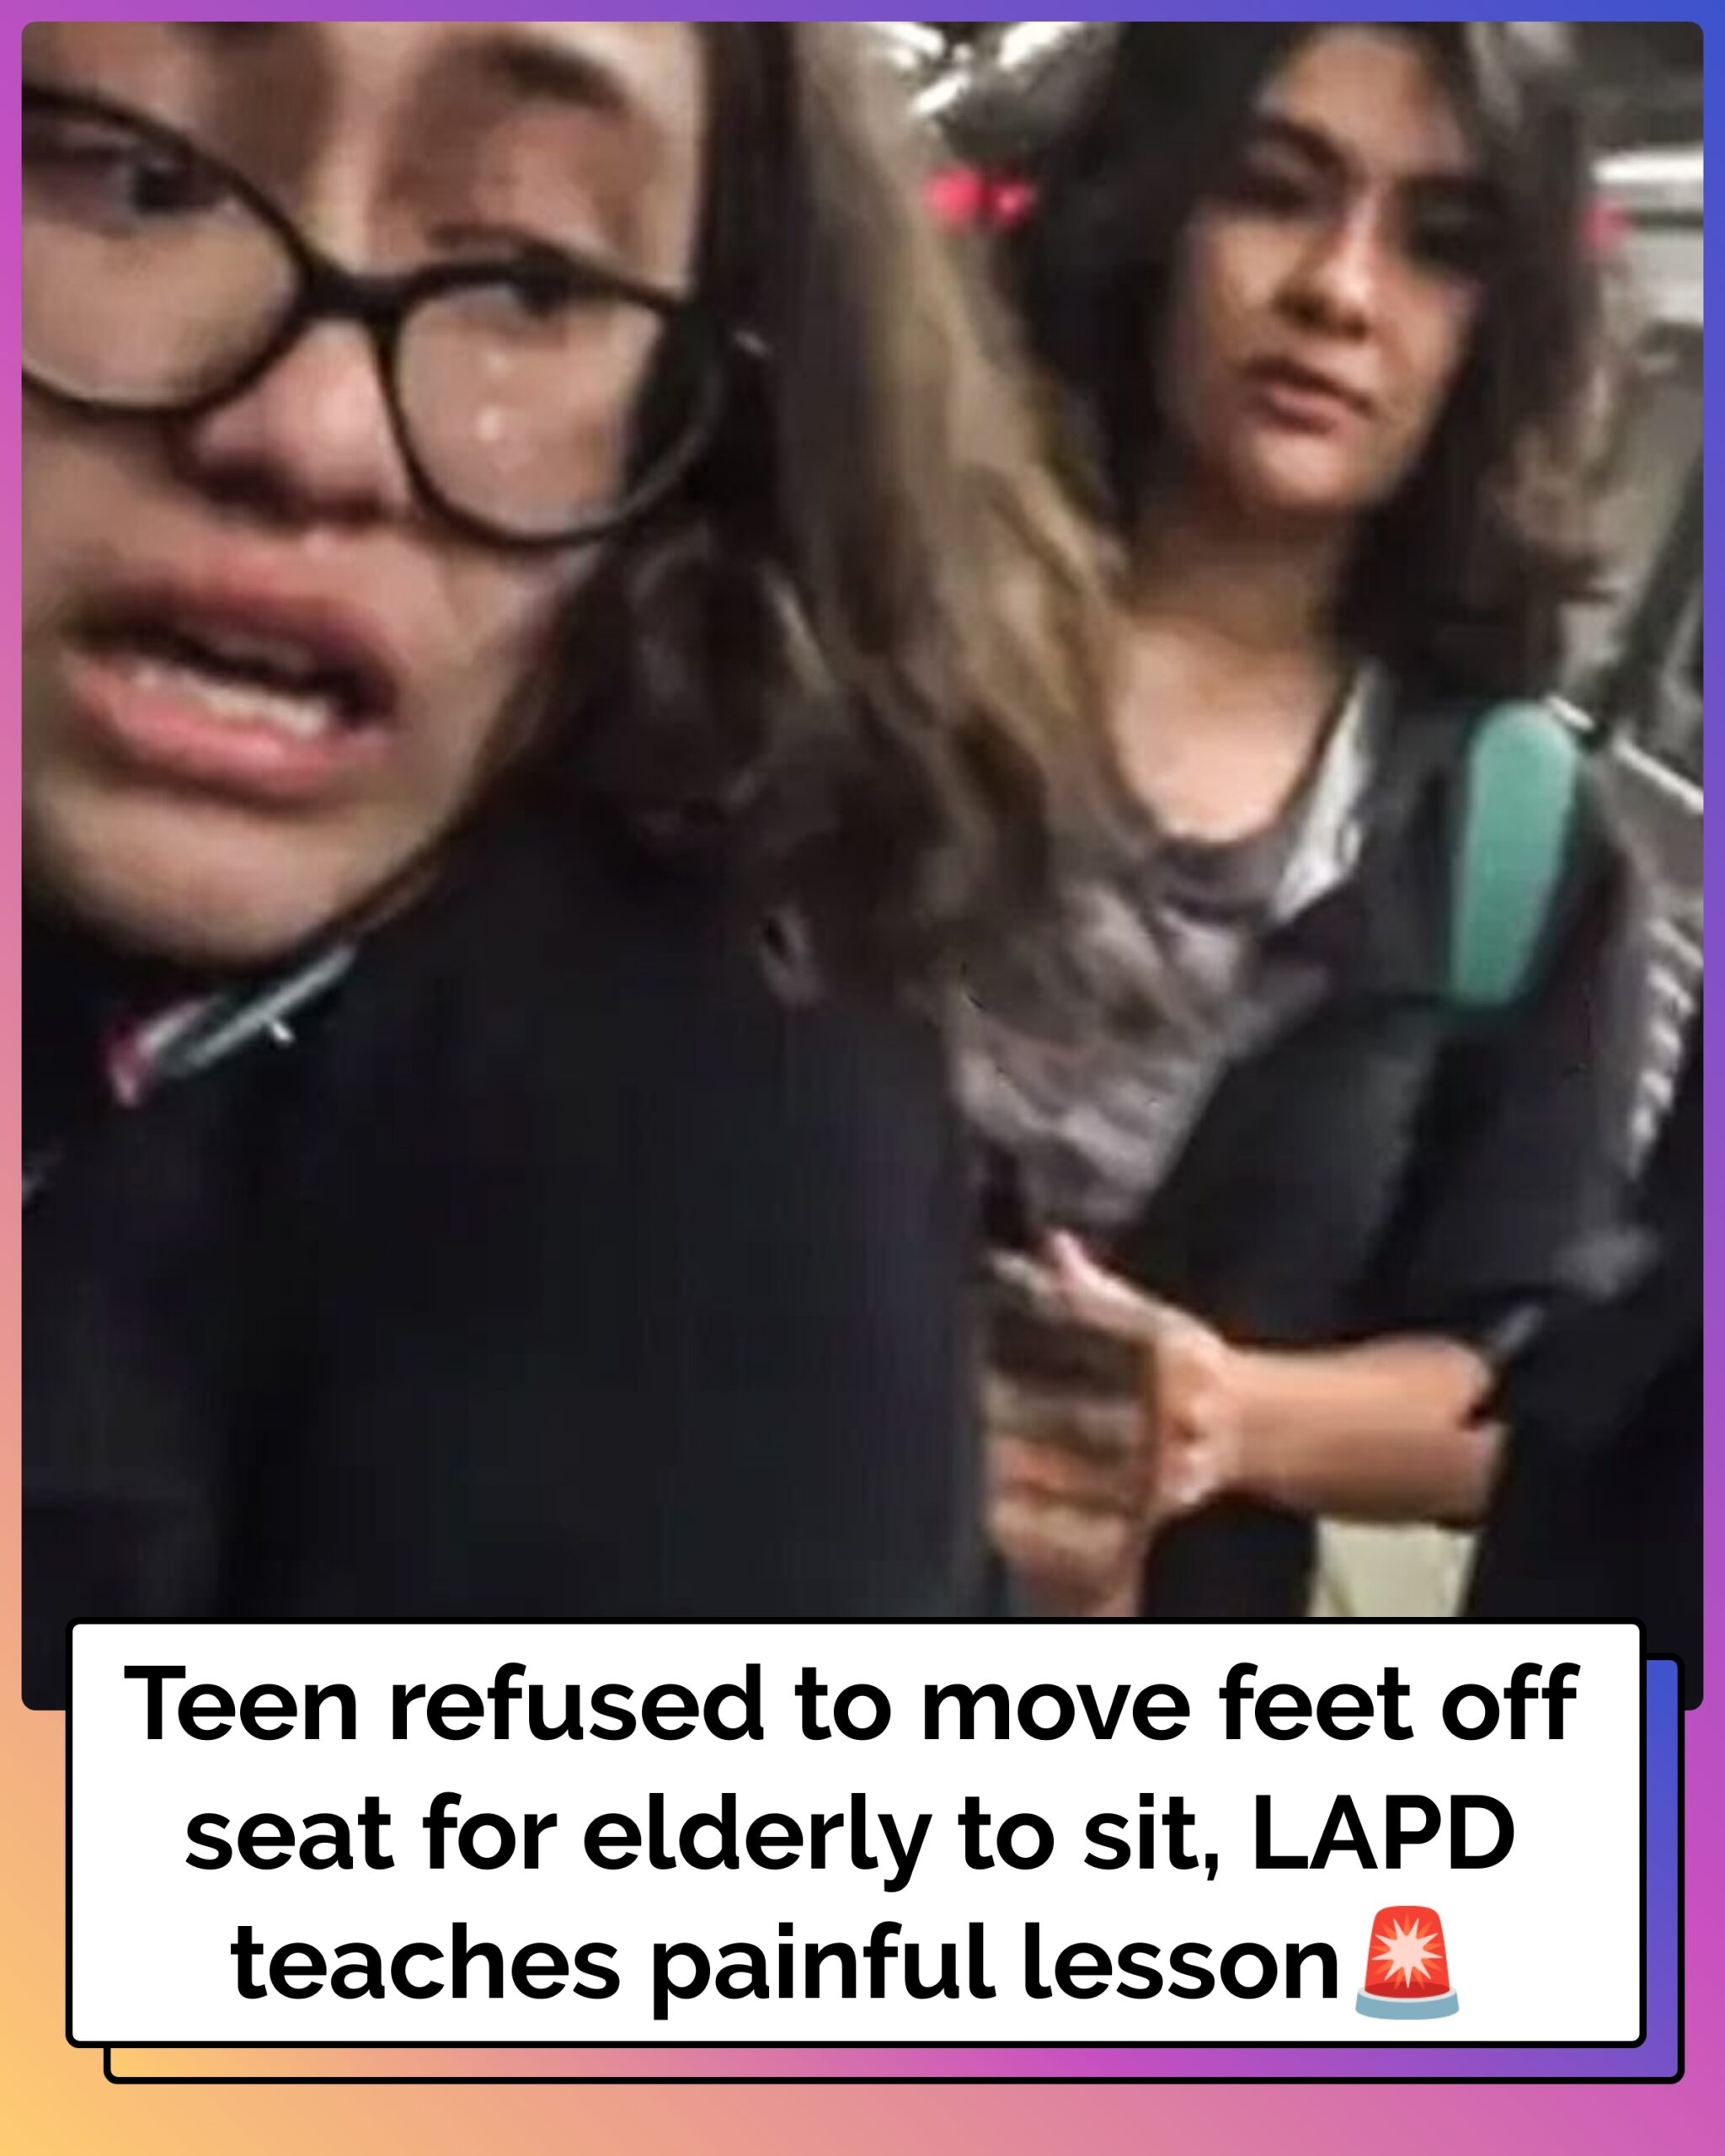 Teen Refuses To Move Feet Off Seat For Elderly, LAPD Teaches Painful Lesson